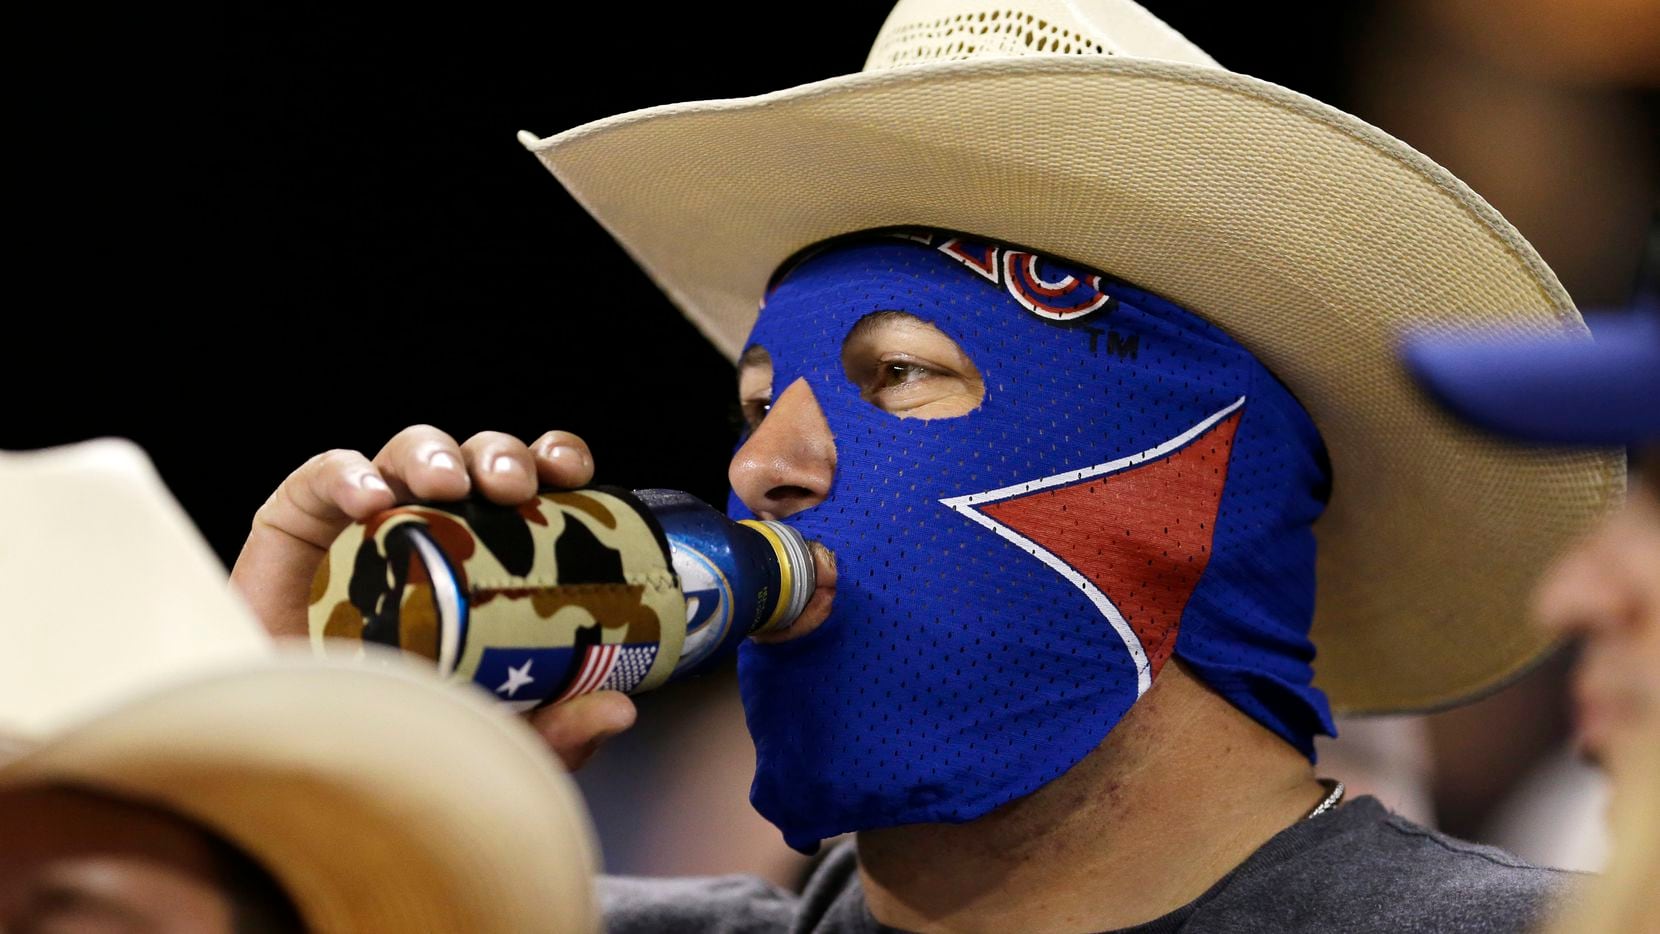 Texas Rangers fans rejoice Team has cheap beer and relatively cheap